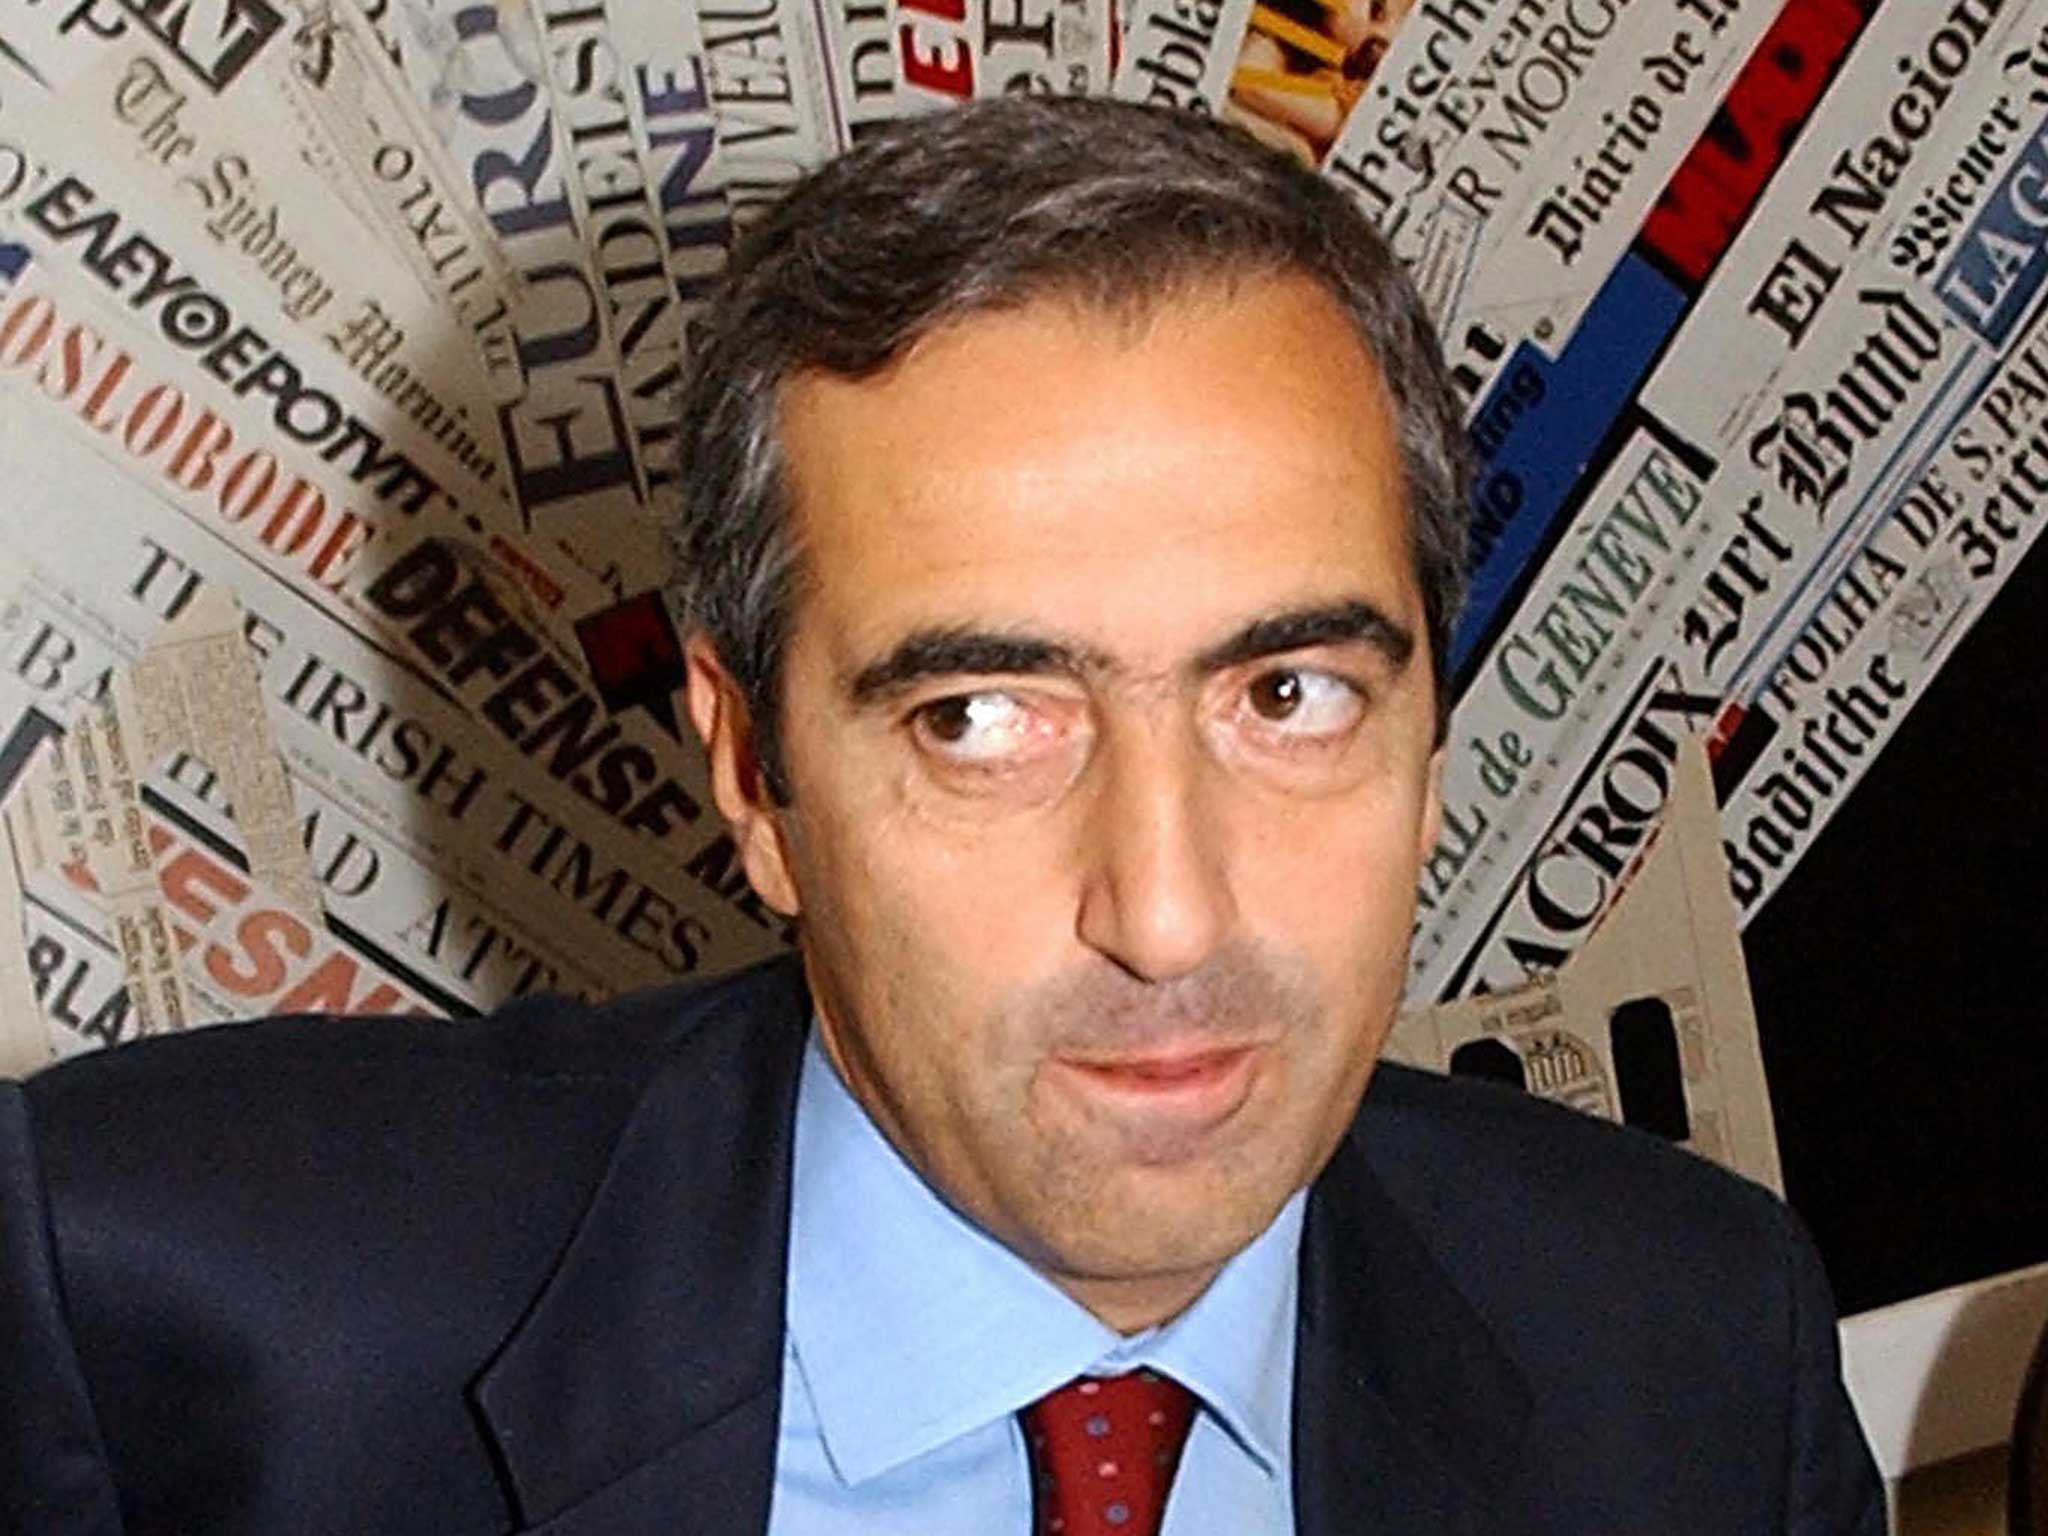 Maurizio Gasparri, pictured in 2003, was a journalist before going into politics